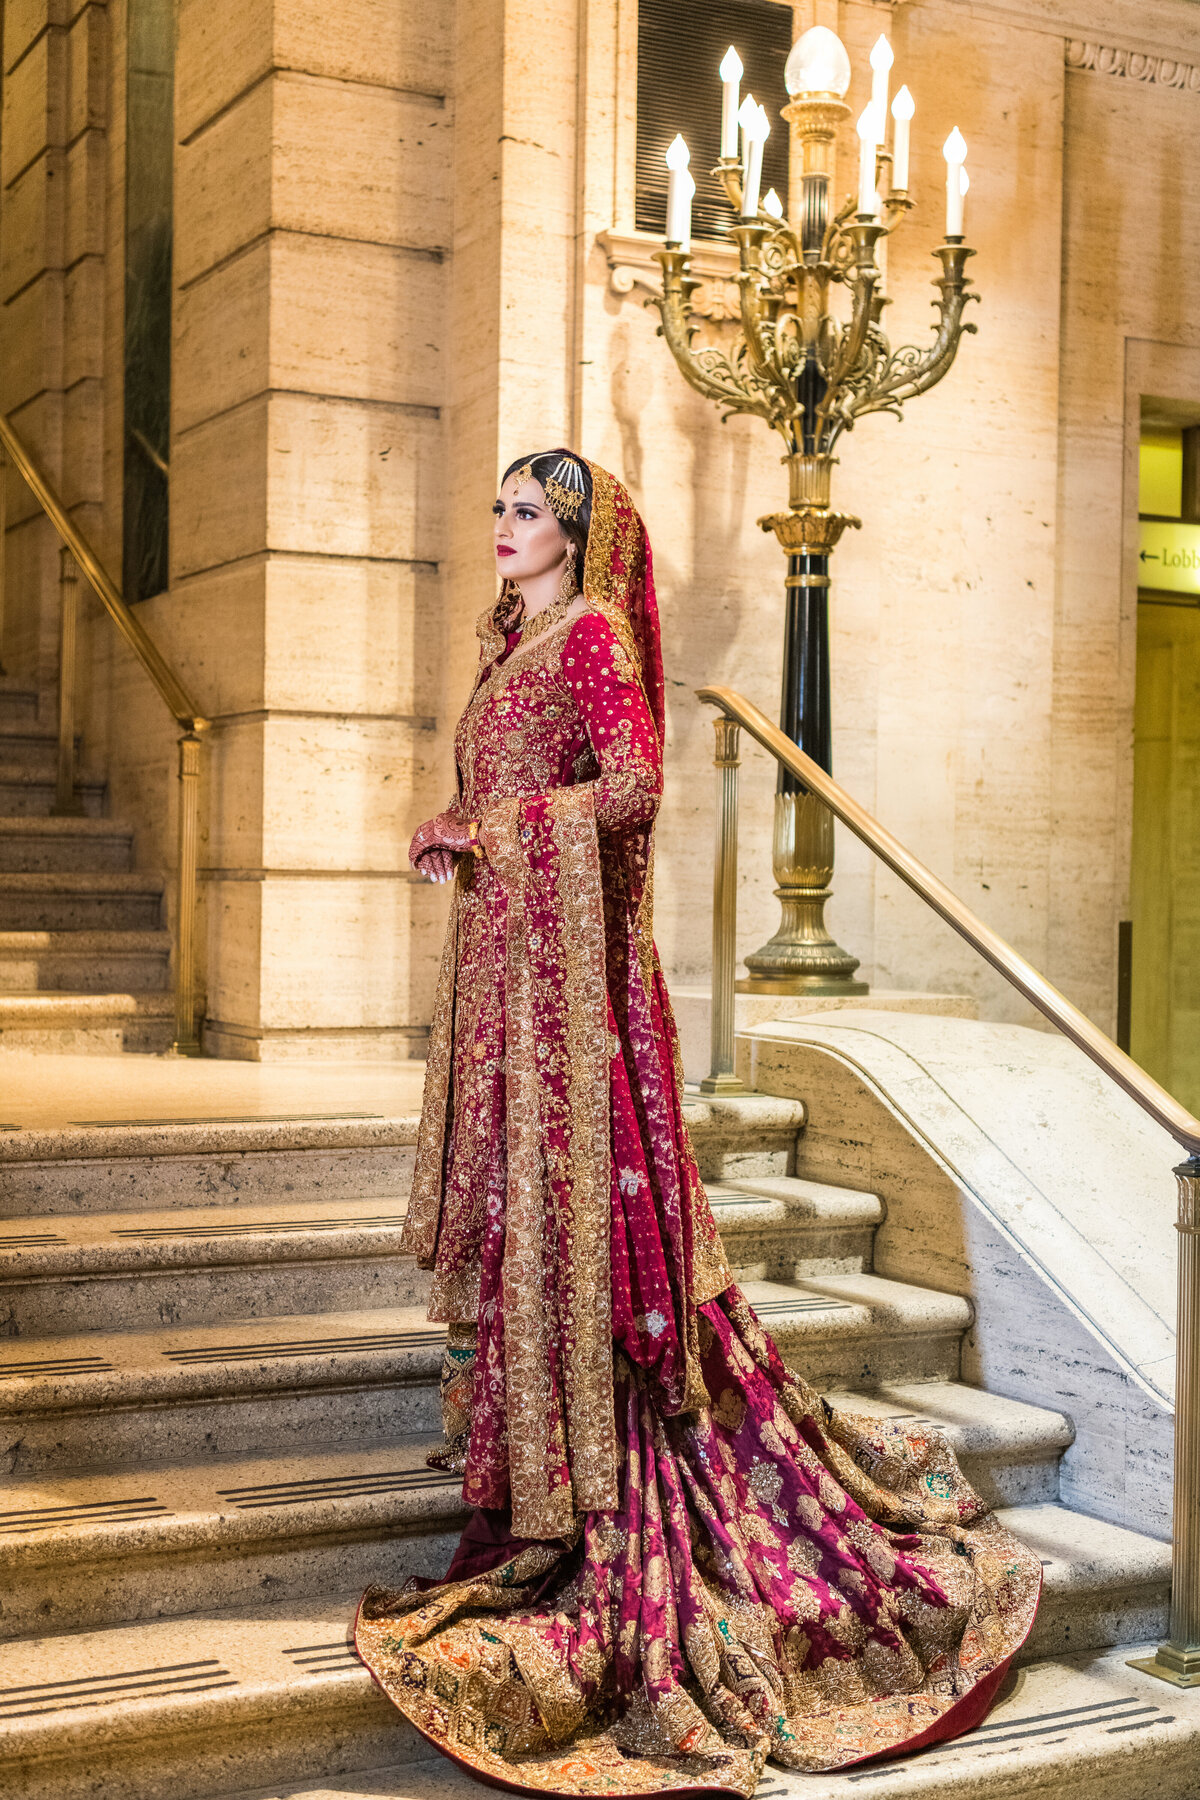 maha_studios_wedding_photography_chicago_new_york_california_sophisticated_and_vibrant_photography_honoring_modern_south_asian_and_multicultural_weddings5